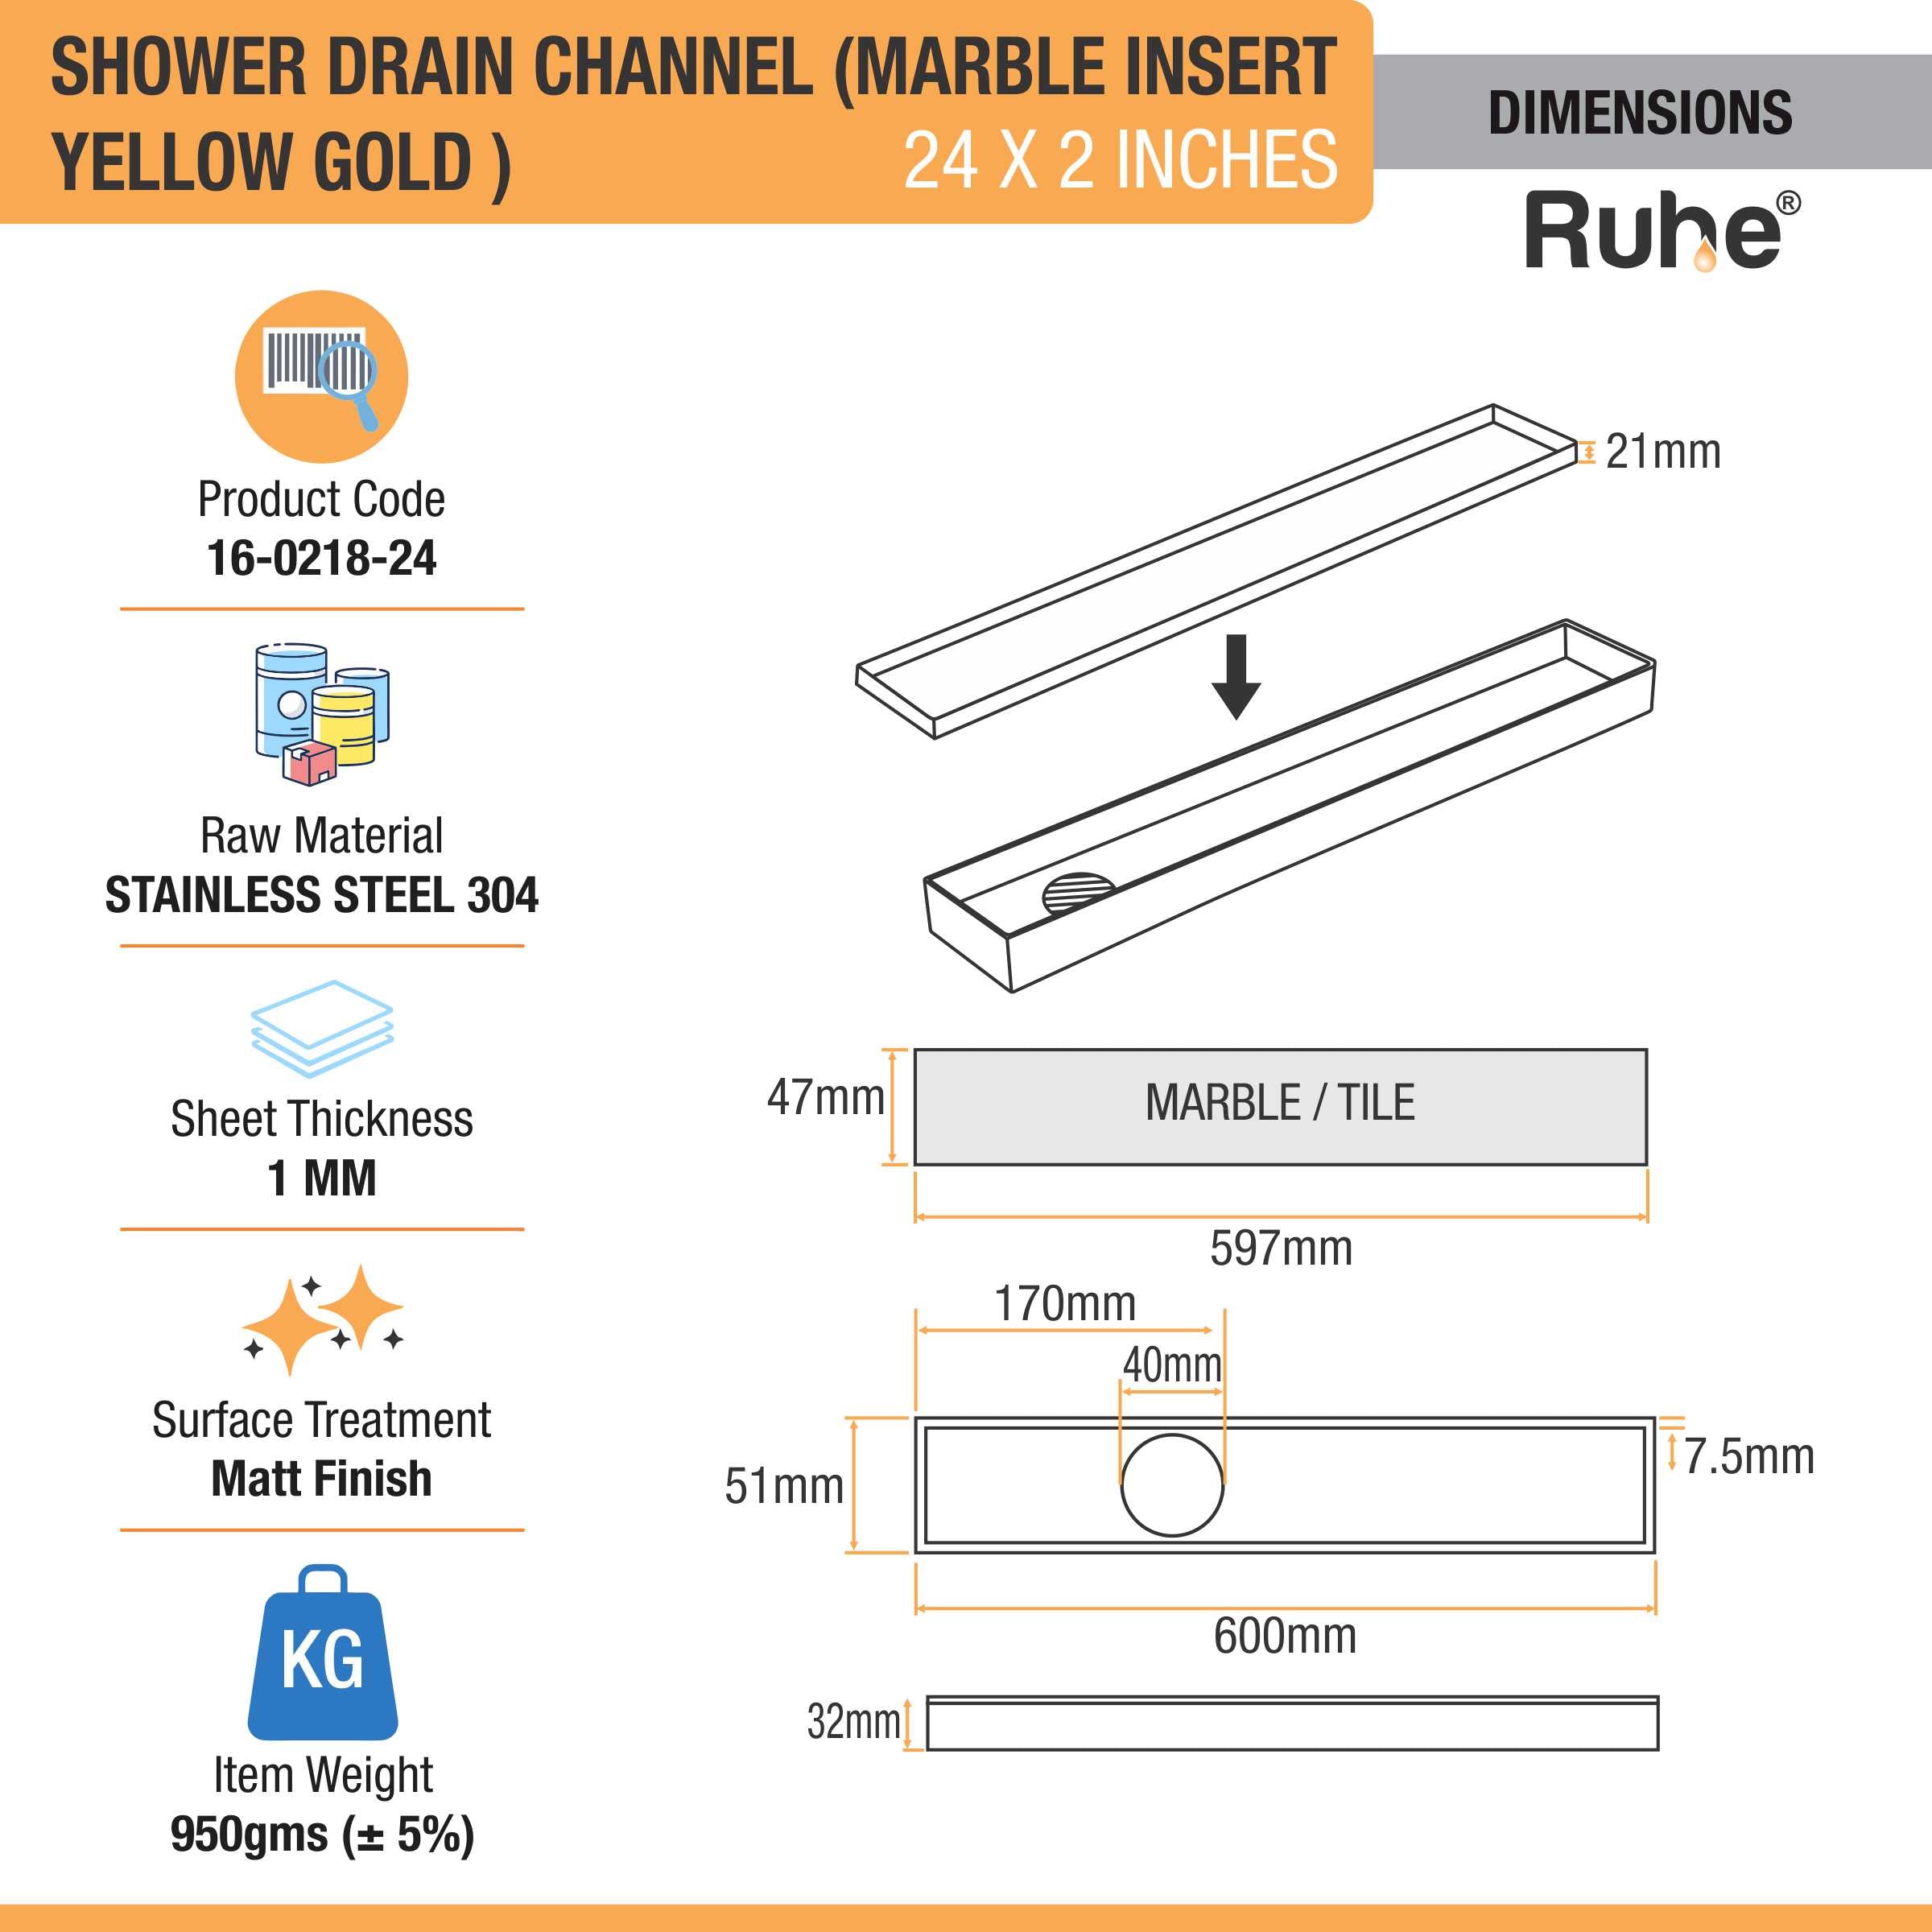 Marble Insert Shower Drain Channel (24 x 2 Inches) YELLOW GOLD dimensions and size